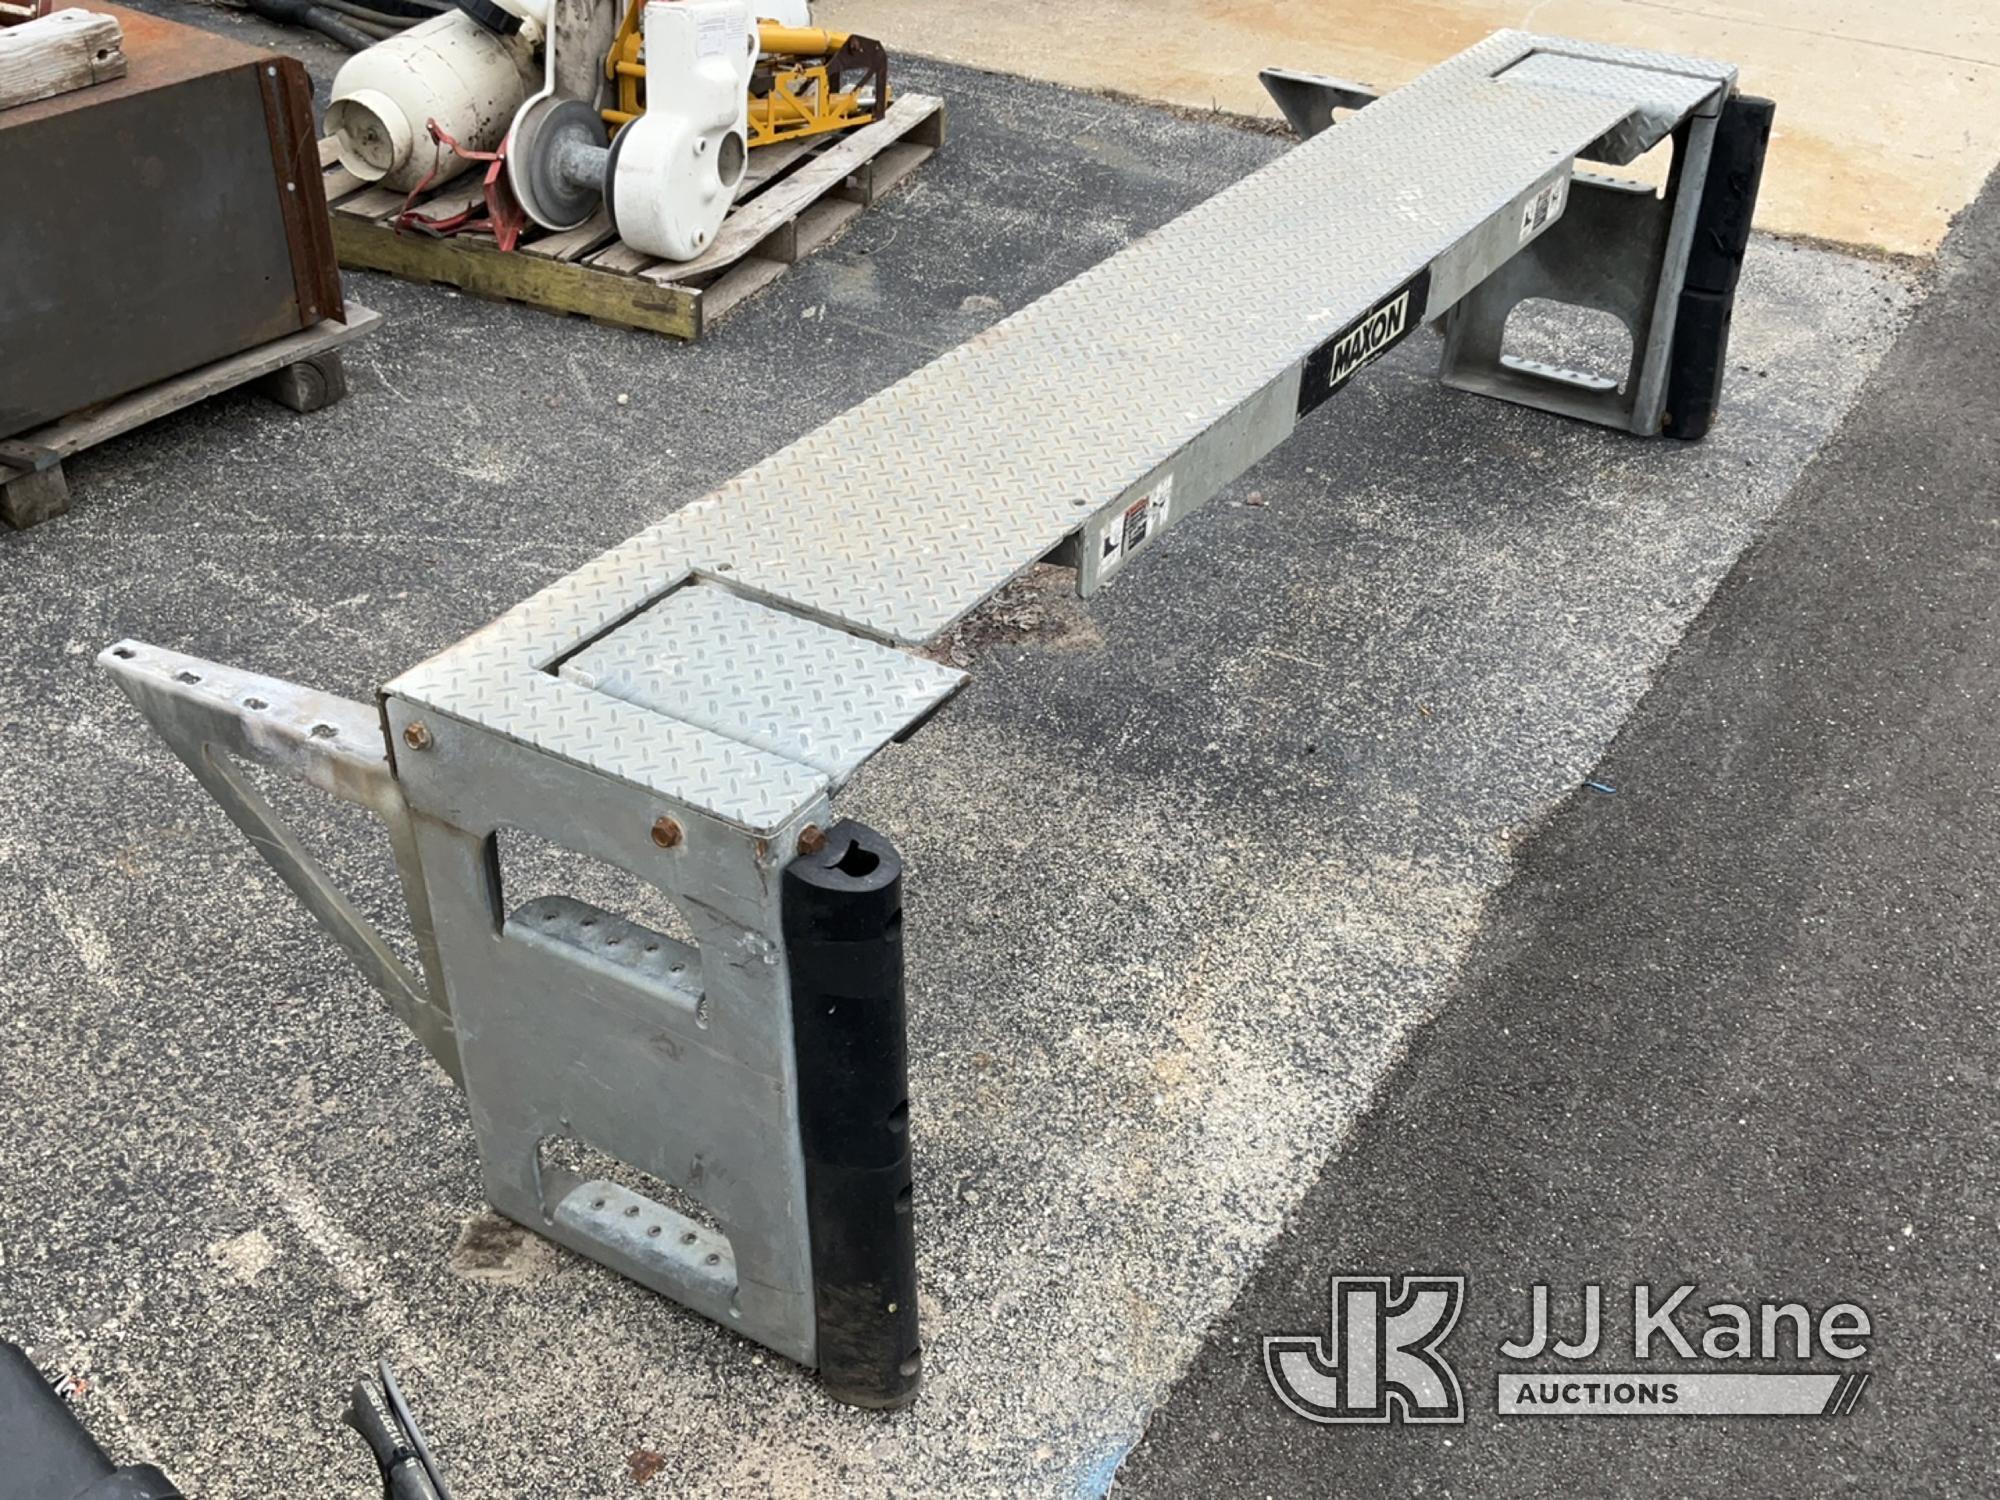 (South Beloit, IL) 2019 Maxon Liftgate (Seller States-Working Condition when Removed) NOTE: This uni